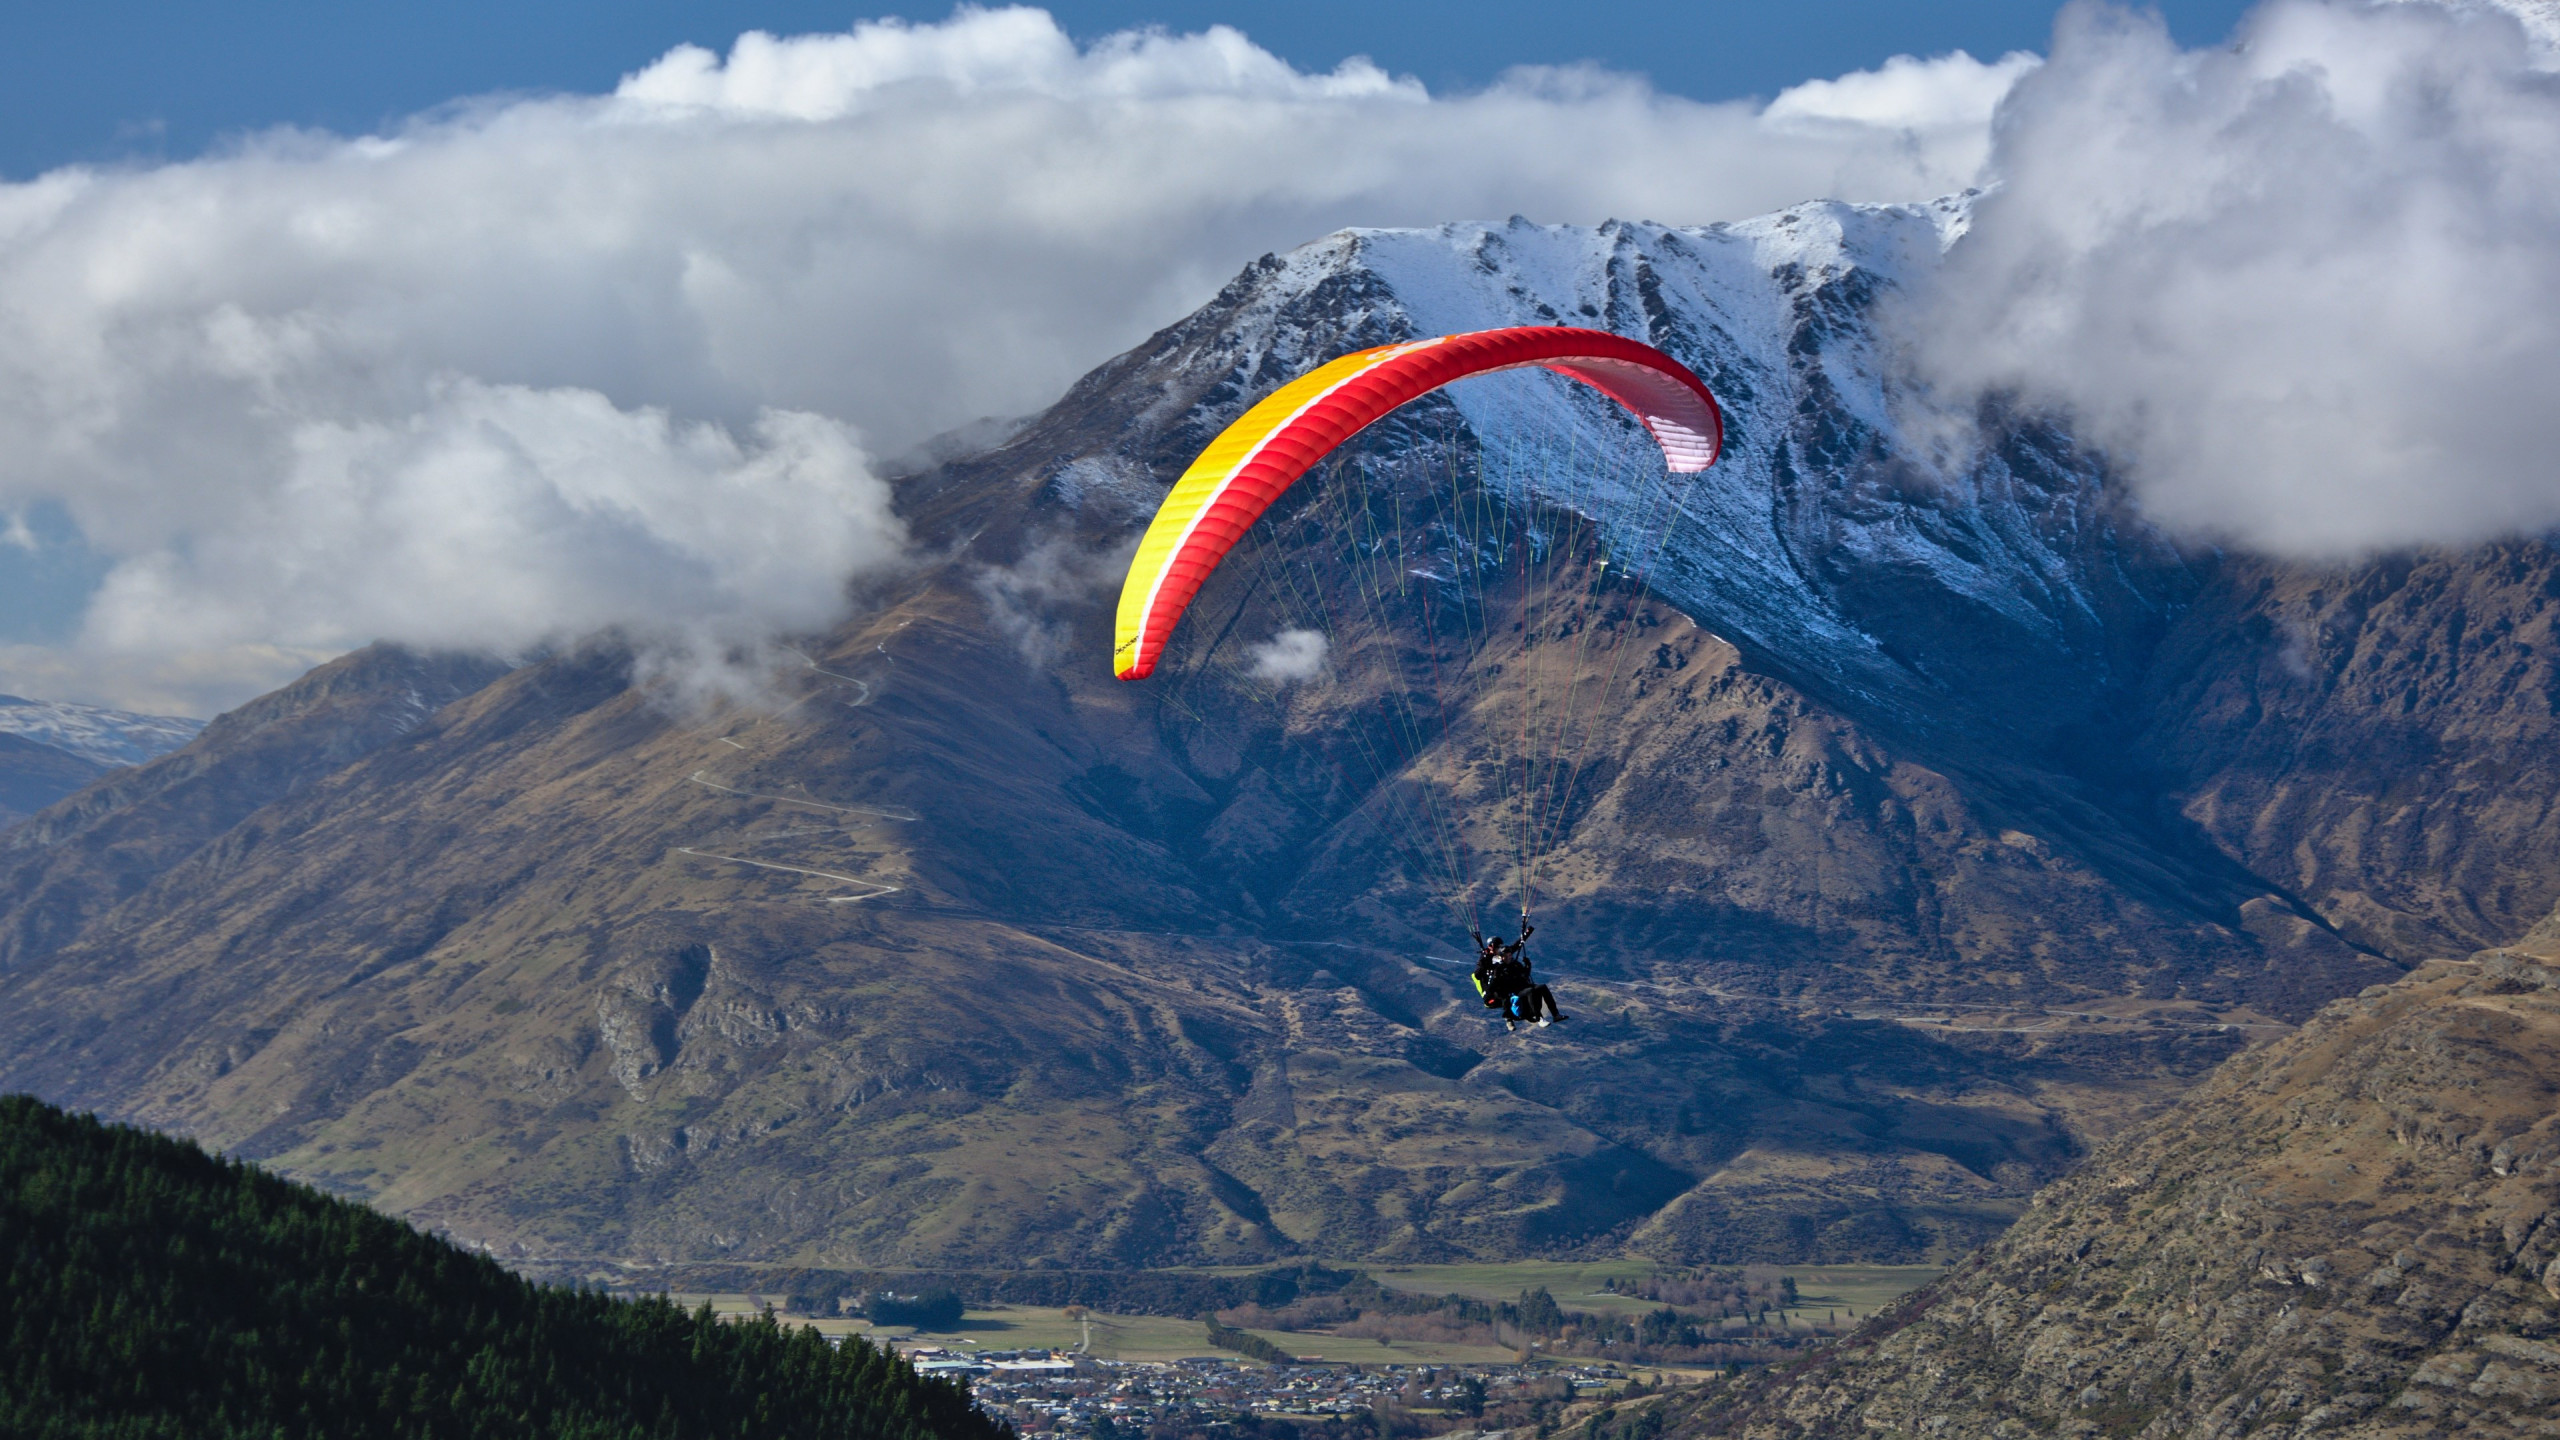 Paraglider up in the sky wallpaper 2560x1440